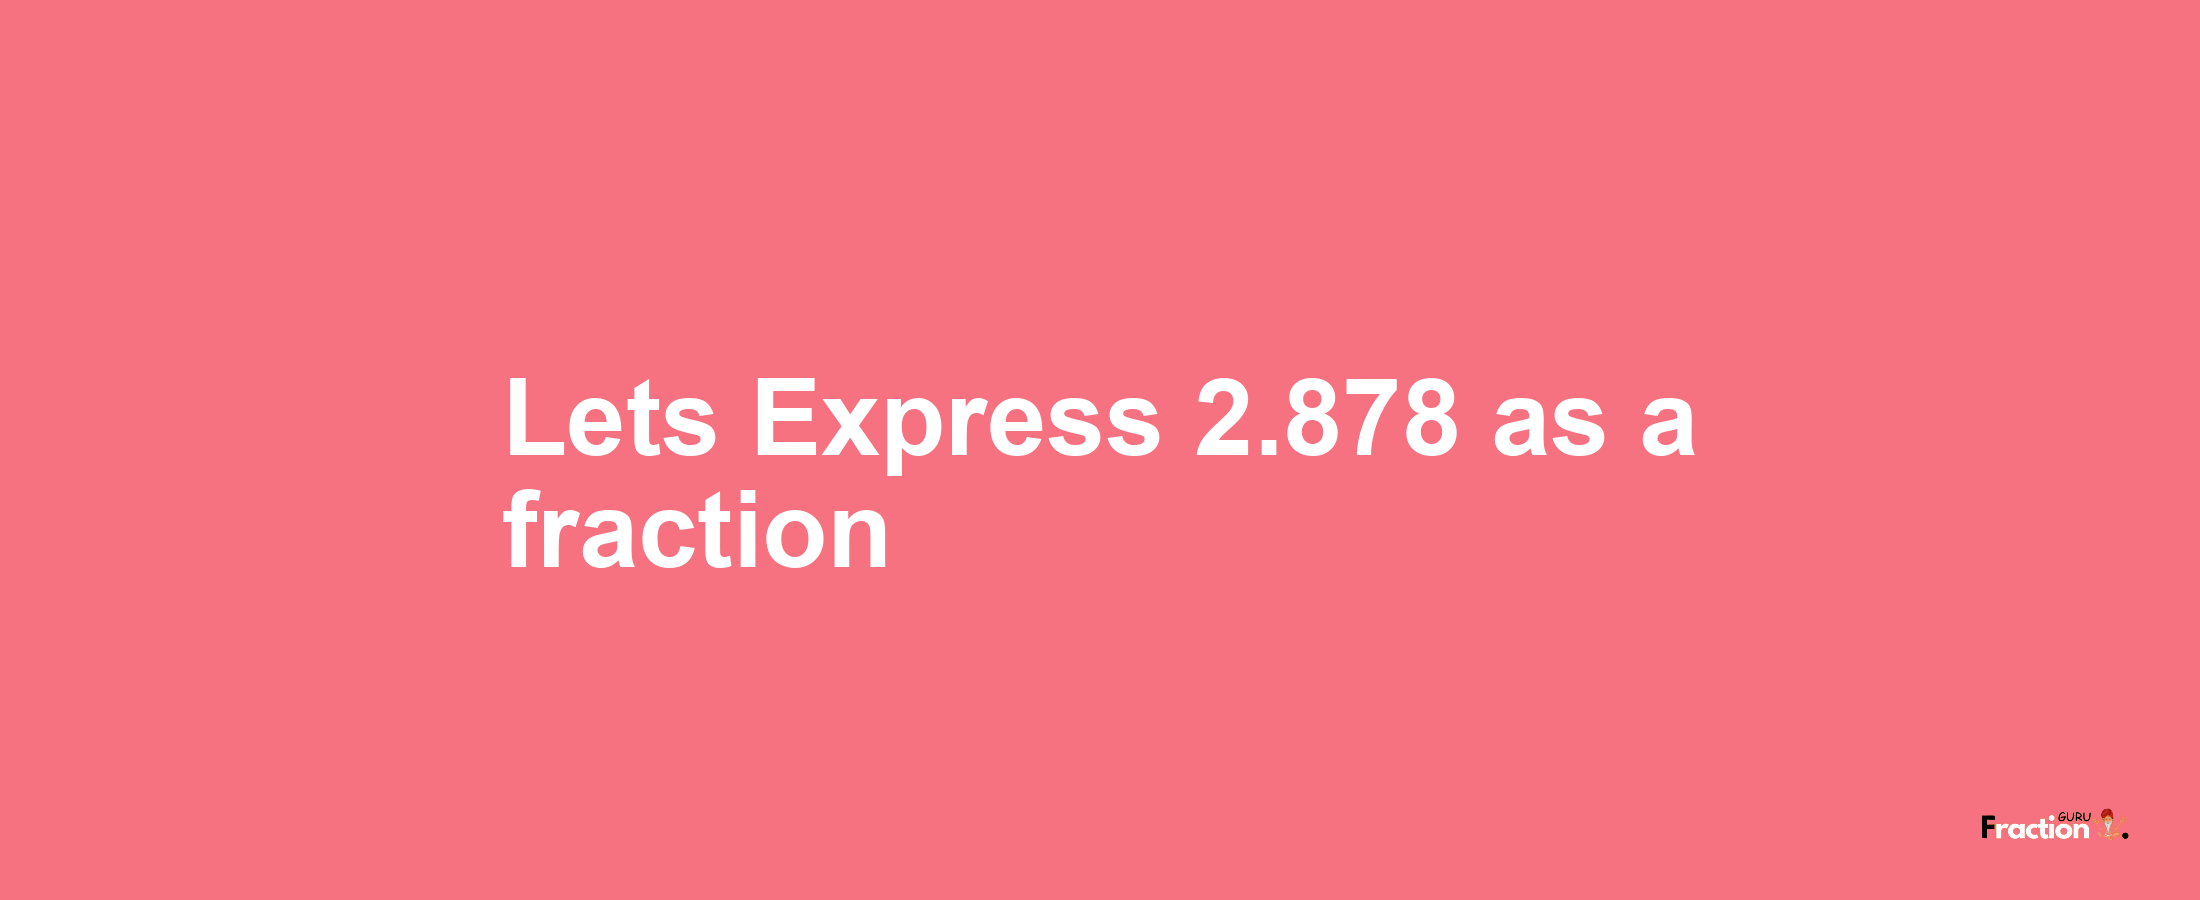 Lets Express 2.878 as afraction